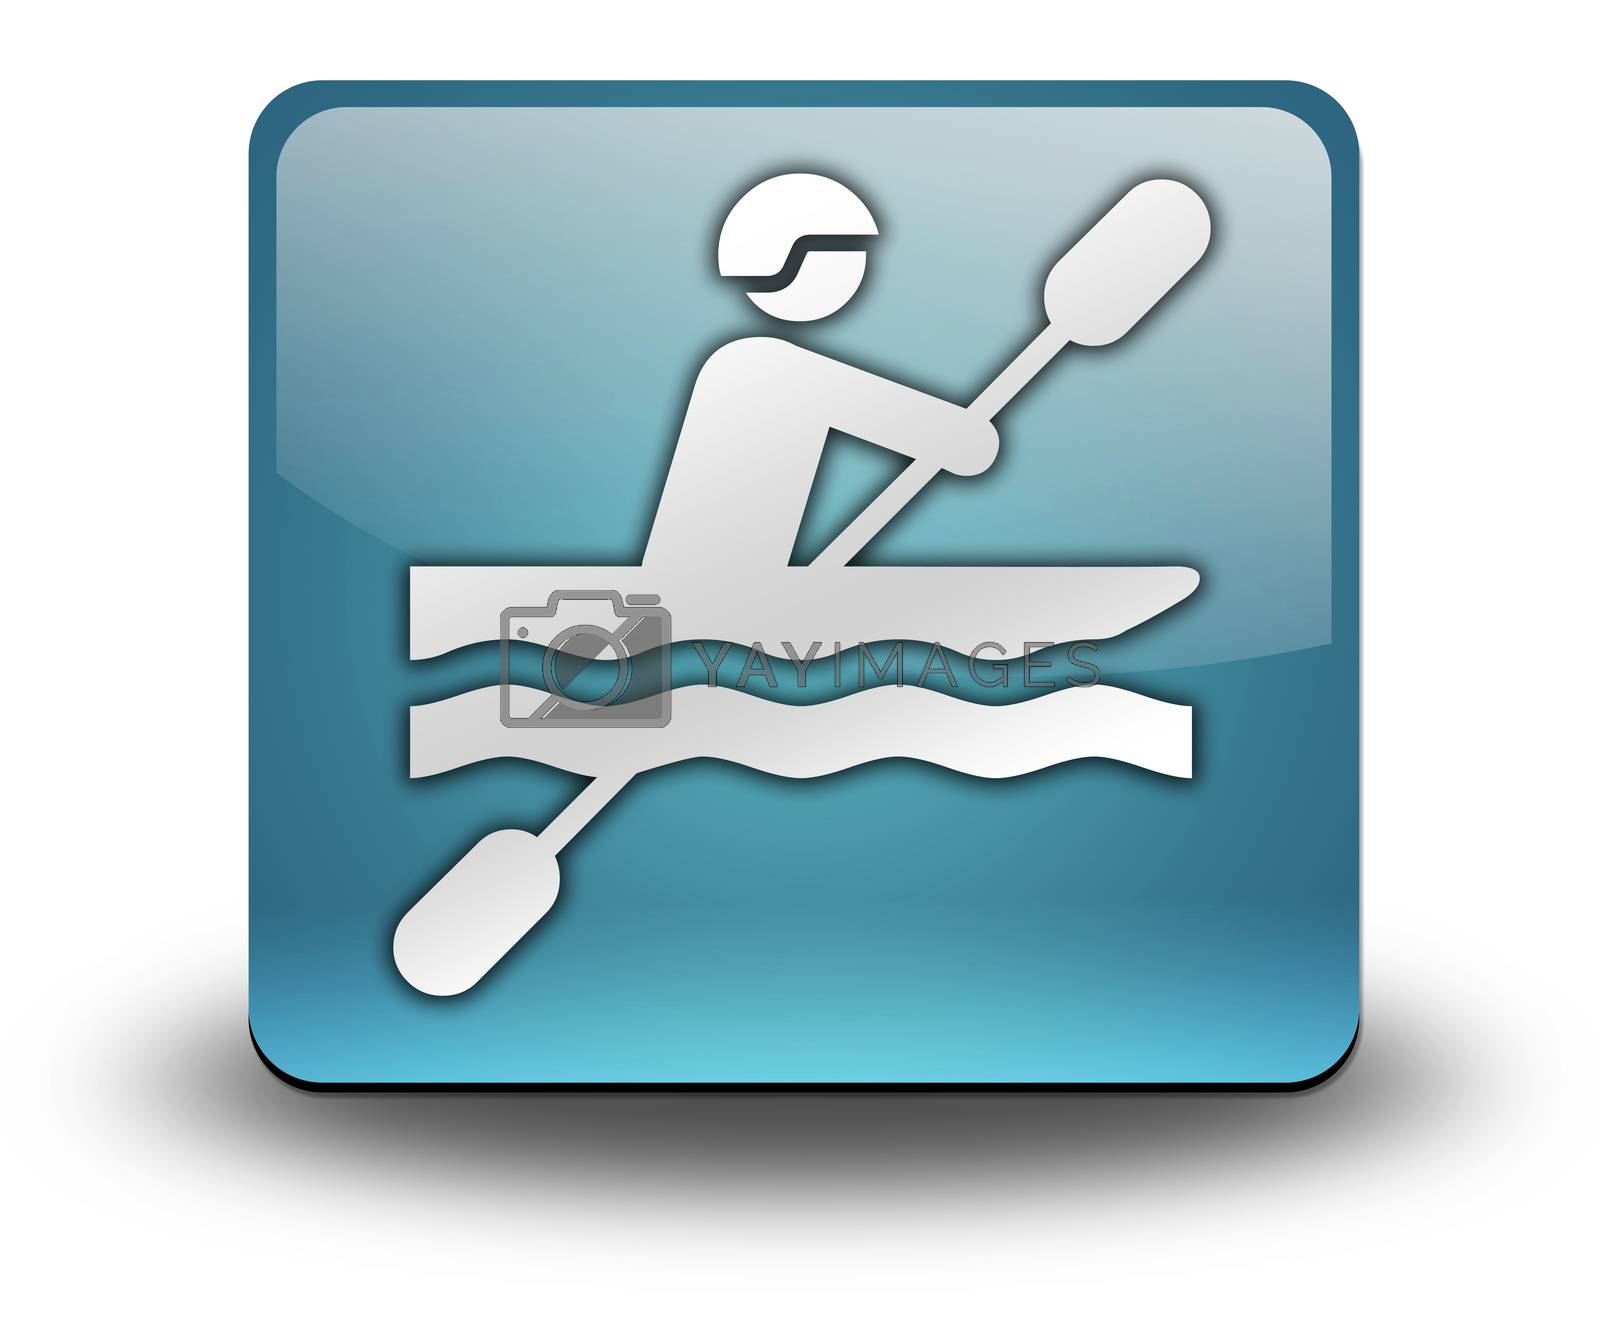 Royalty free image of Icon, Button, Pictogram Kayaking by mindscanner